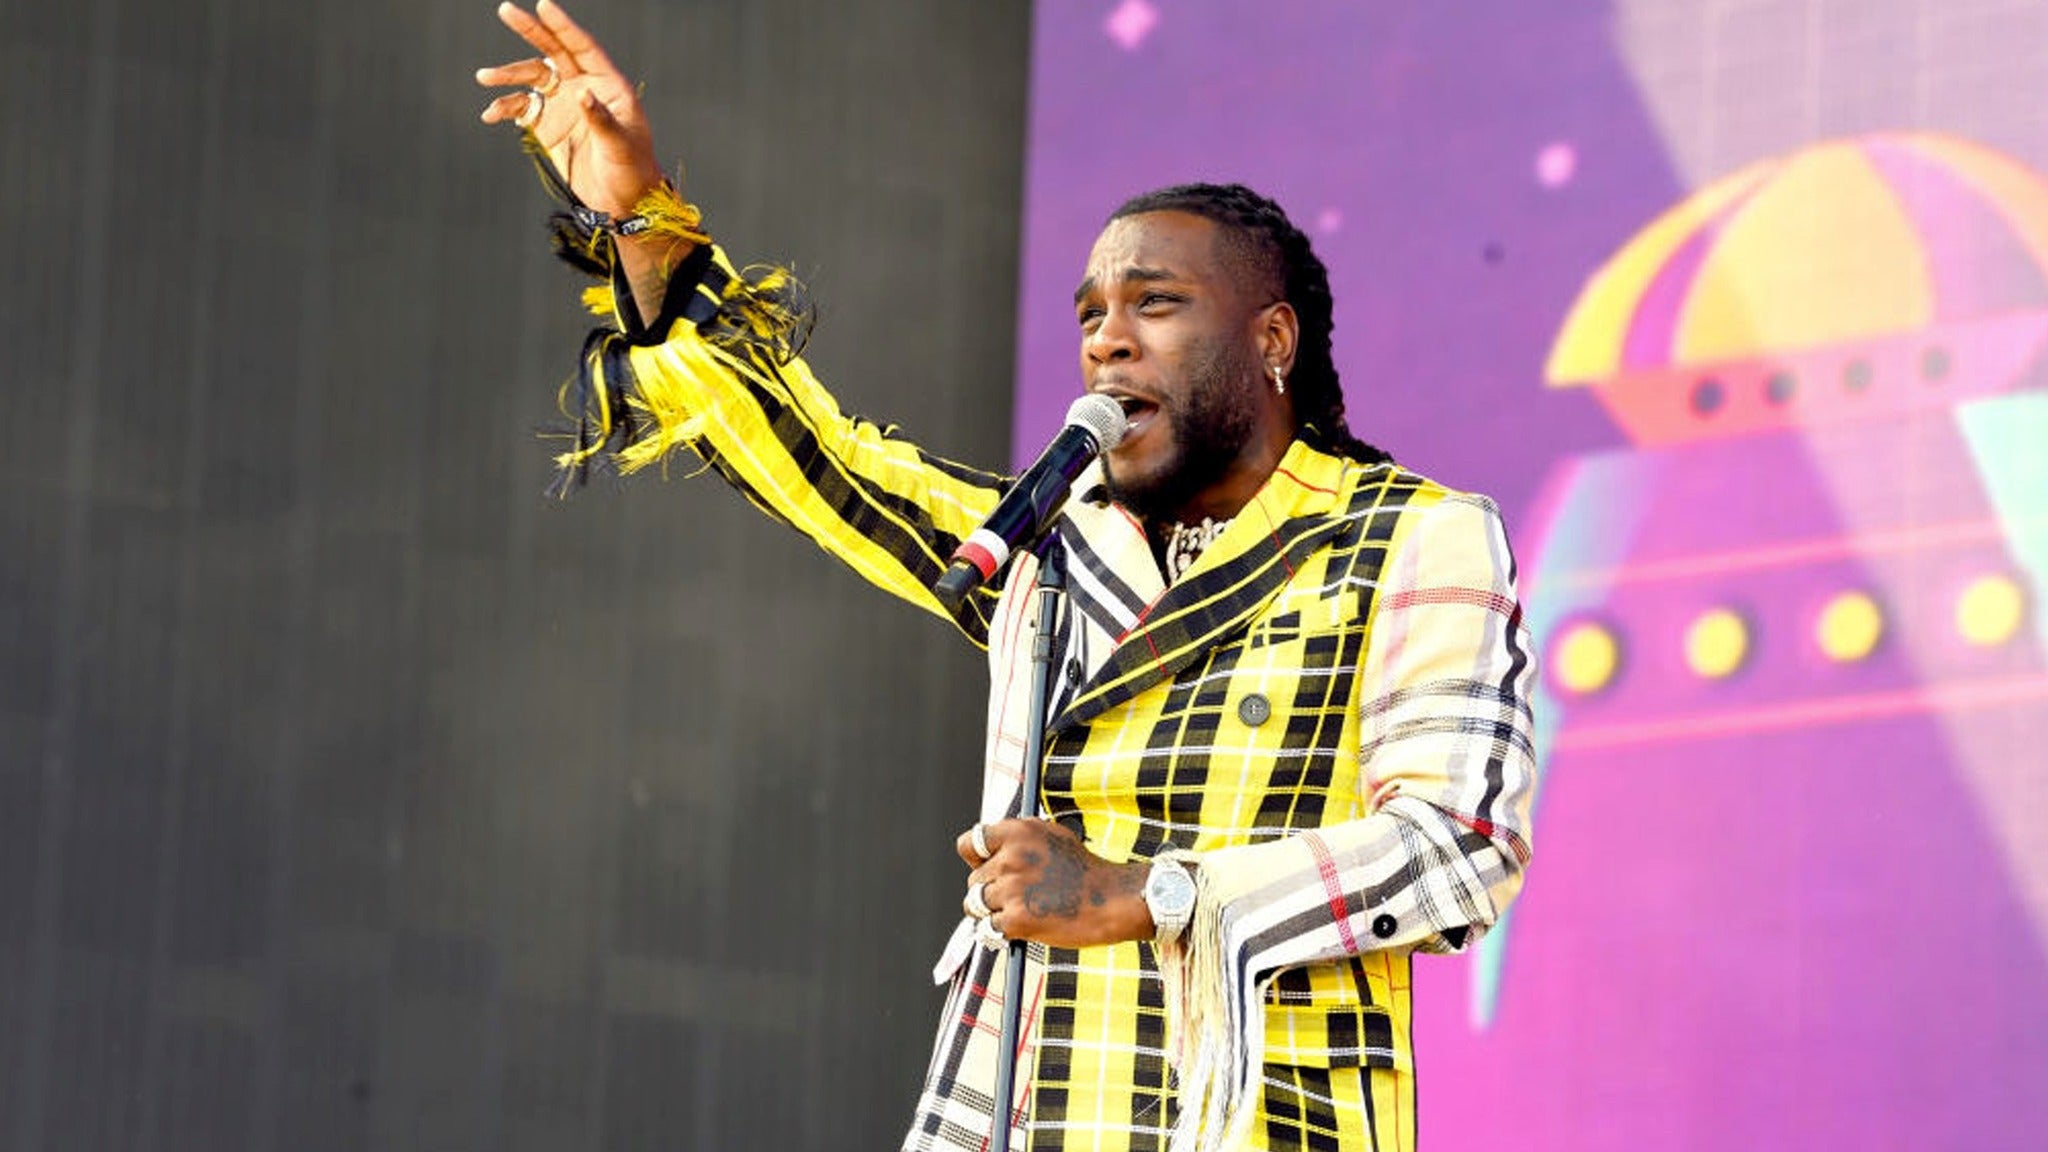 Burna Boy - Twice As Tall Tour in San Francisco promo photo for Artist presale offer code